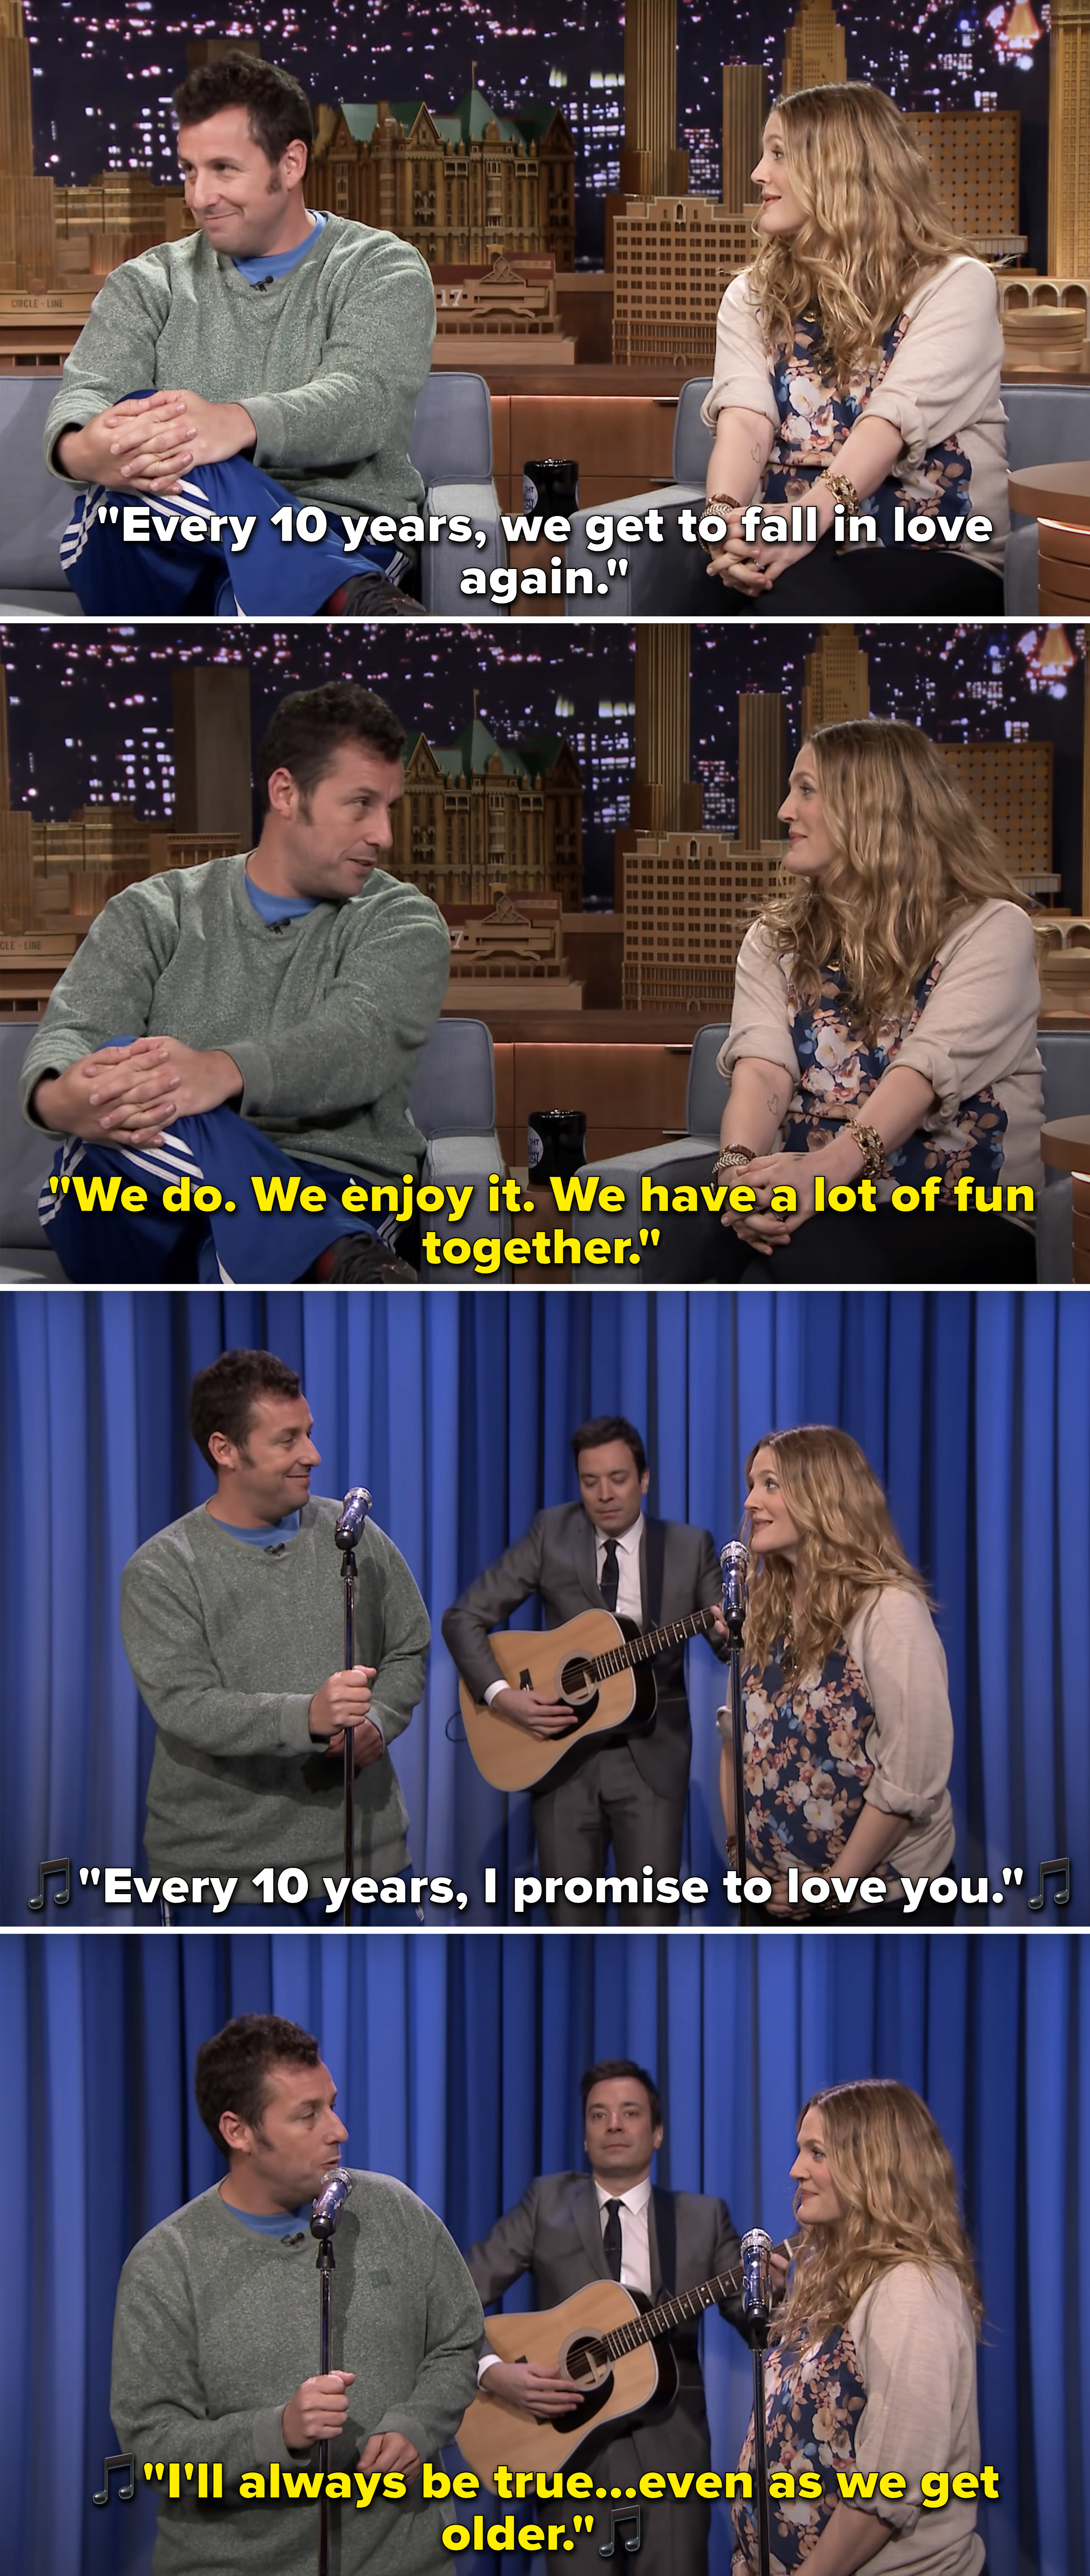 Adam Sandler and Drew Barrymore singing on &quot;The Tonight Show with Jimmy Fallon&quot; as Jimmy Fallon plays guitar